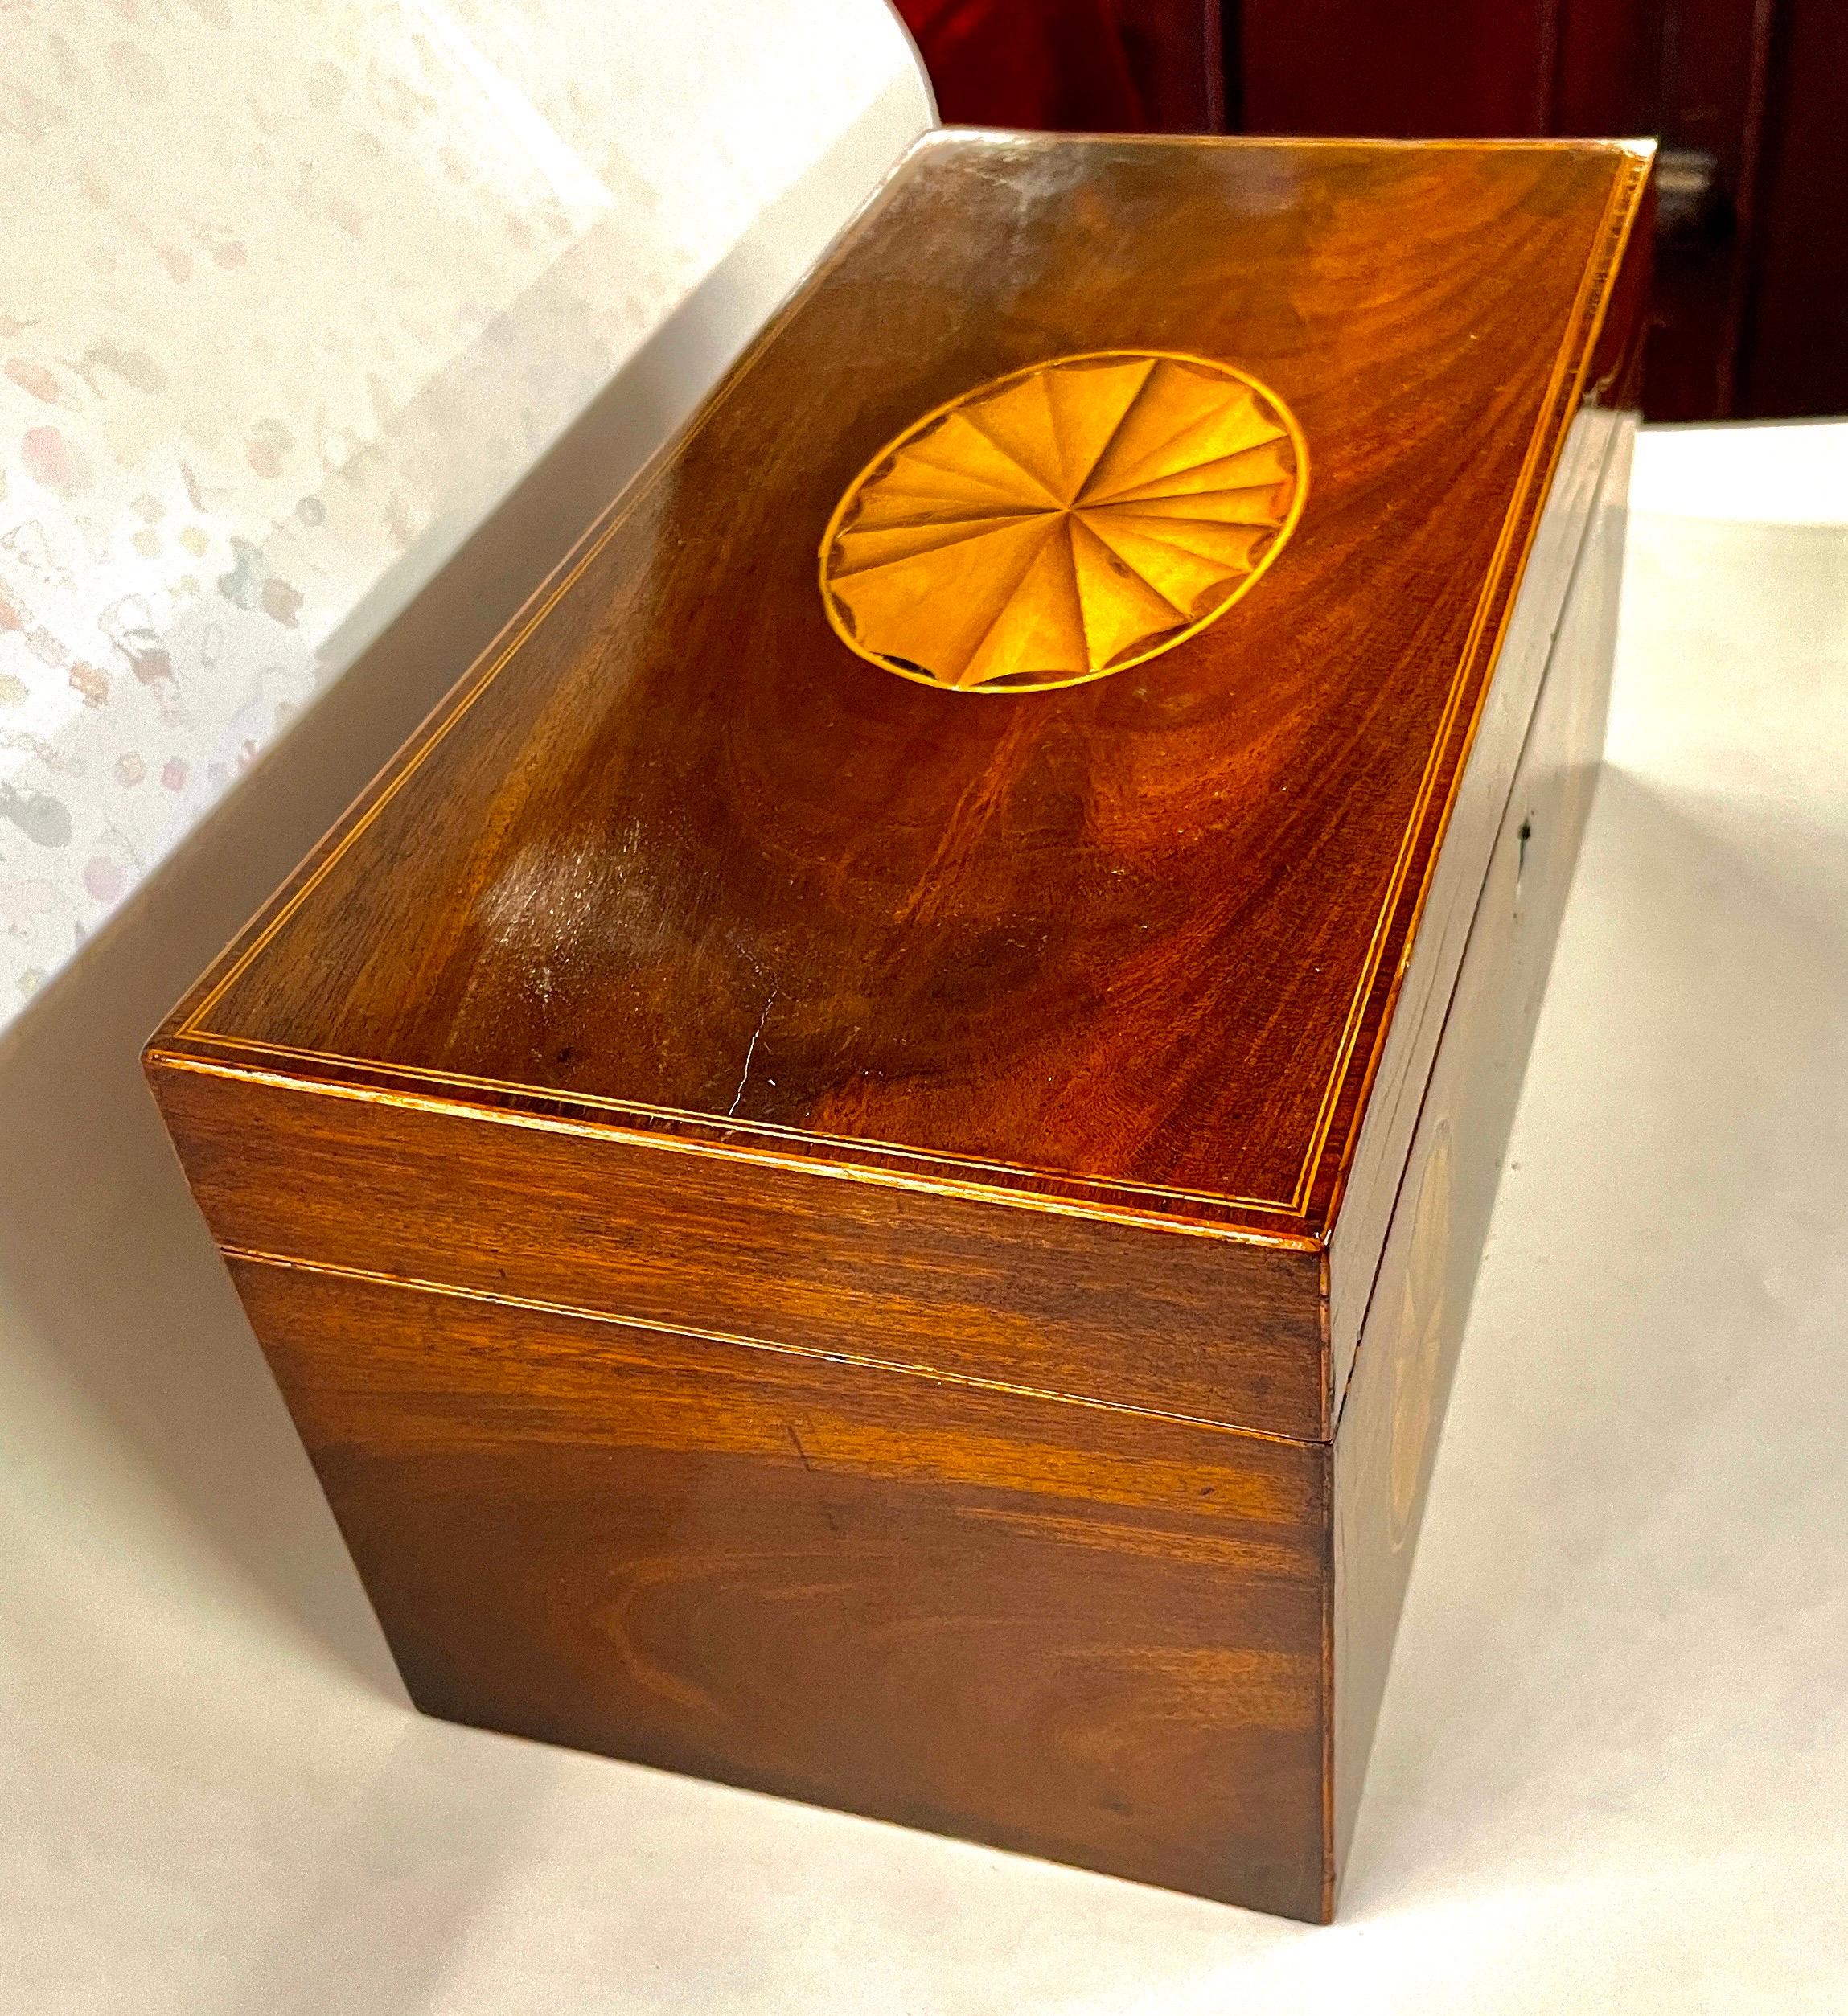 19th Century A Most Fabulous Antique English Inlaid Mahogany Adam Style Tea Caddy with bowl